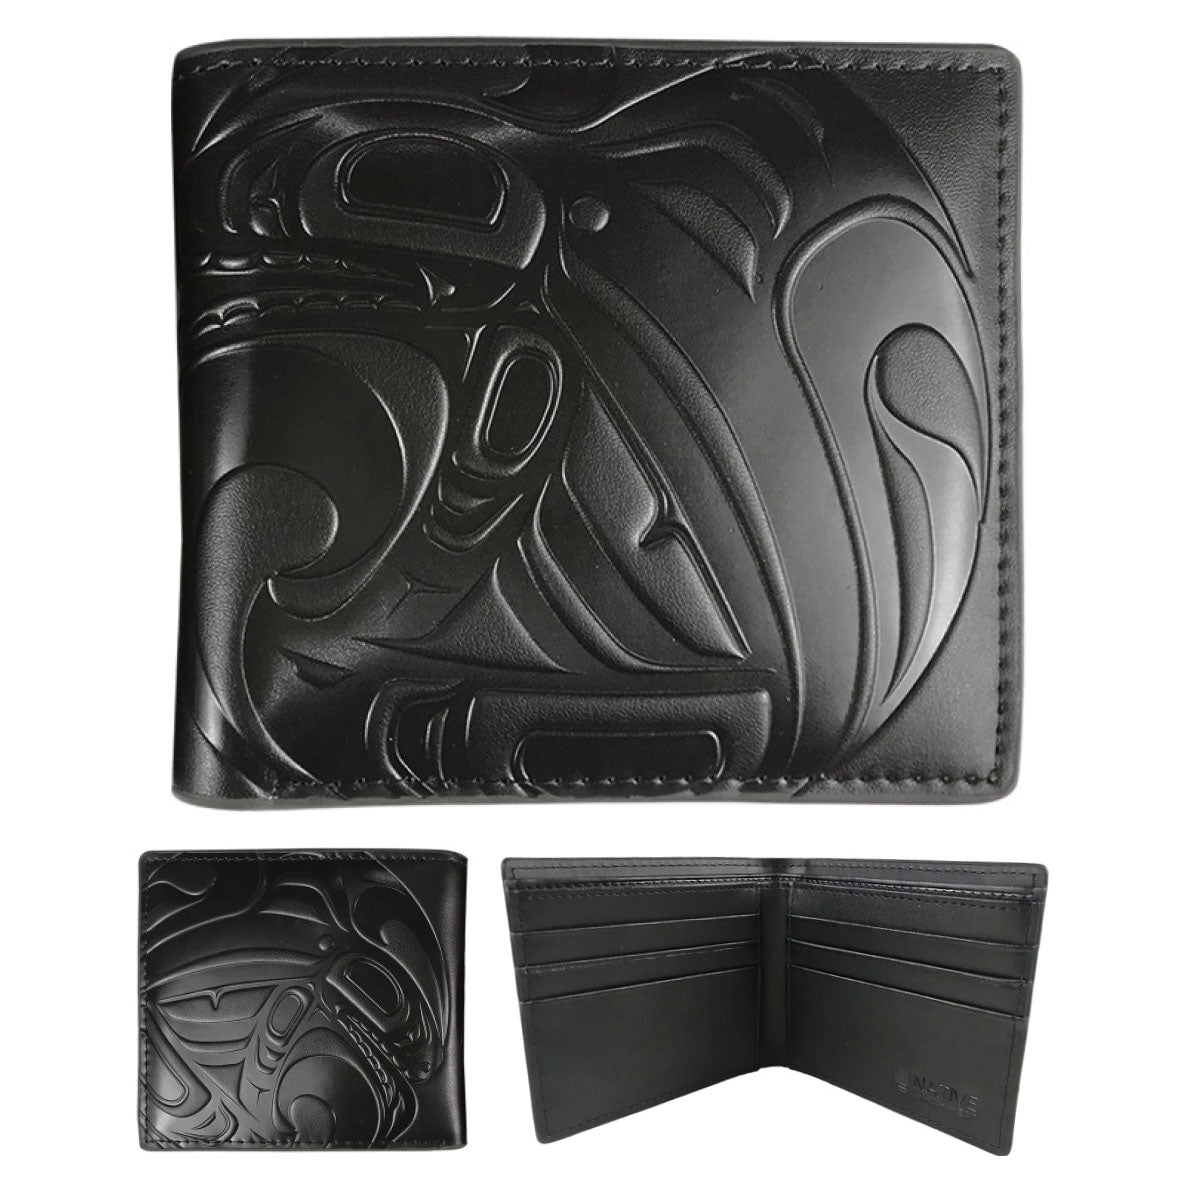 Leather Wallet Trevor Angus Killerwhale - Leather Wallet Trevor Angus Killerwhale -  - House of Himwitsa Native Art Gallery and Gifts